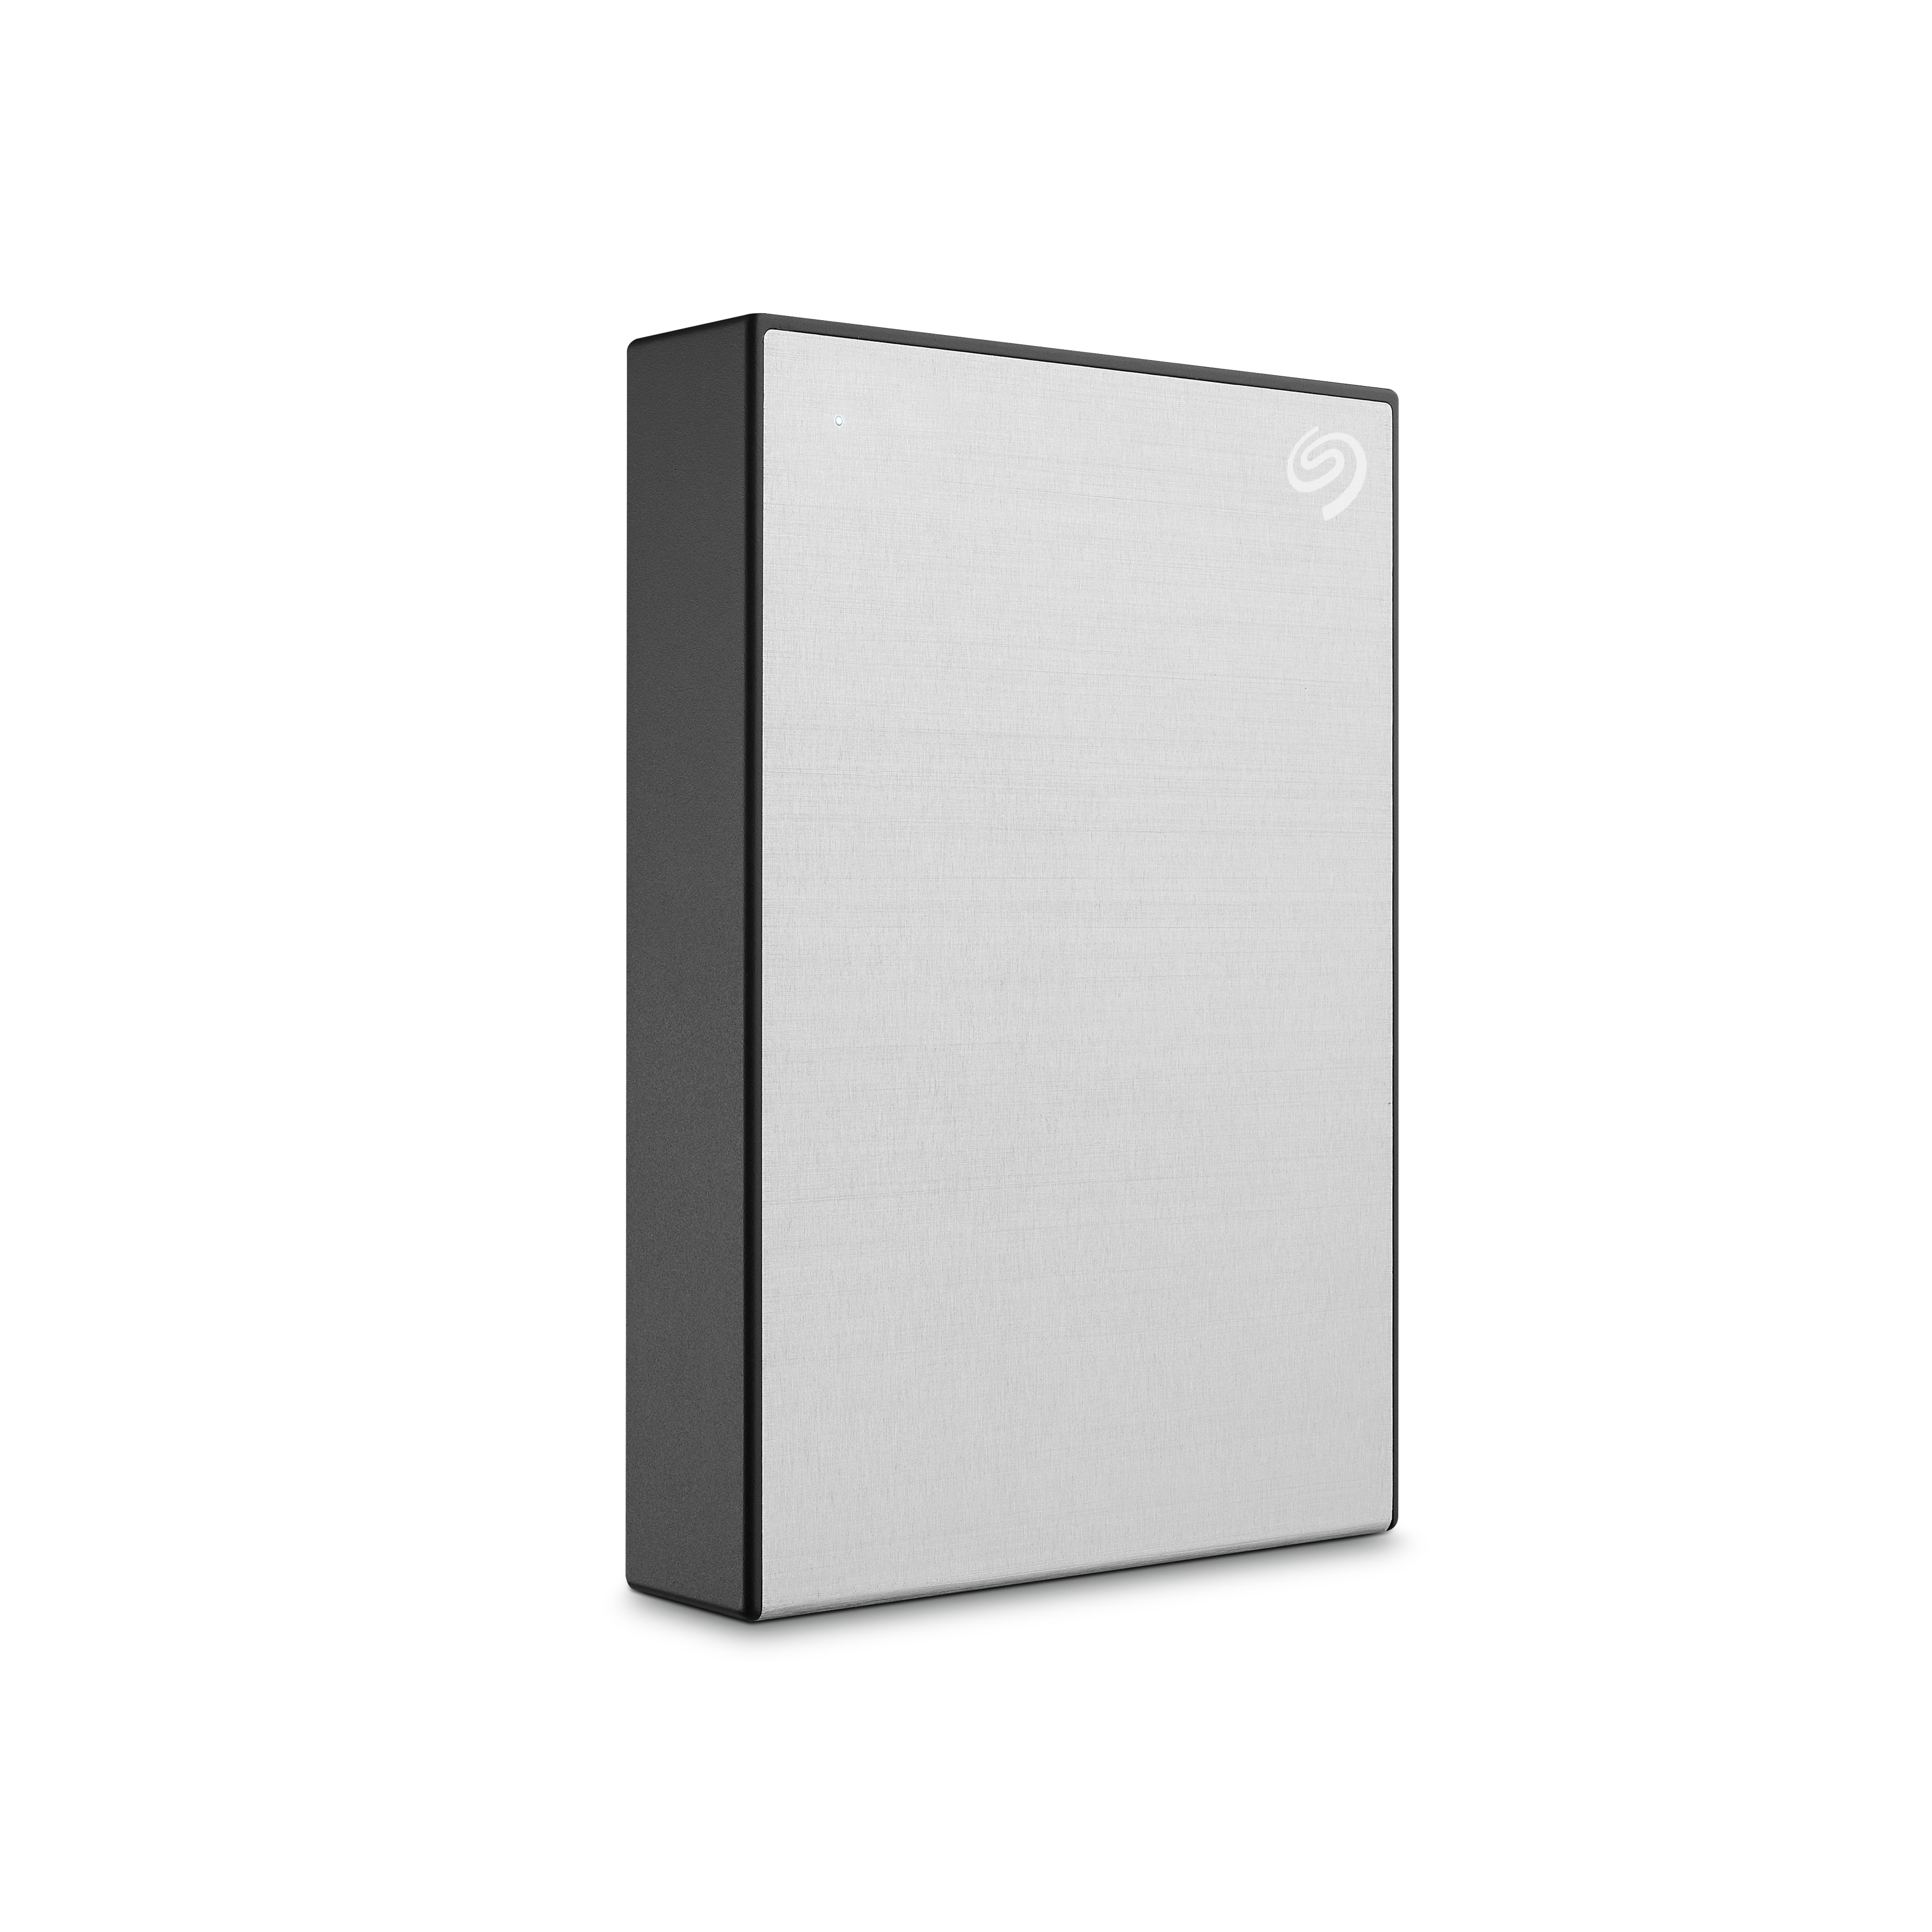 SEAGATE One Touch 2,5 HDD, Zoll, Silber mobile TB Festplatte, extern, 5